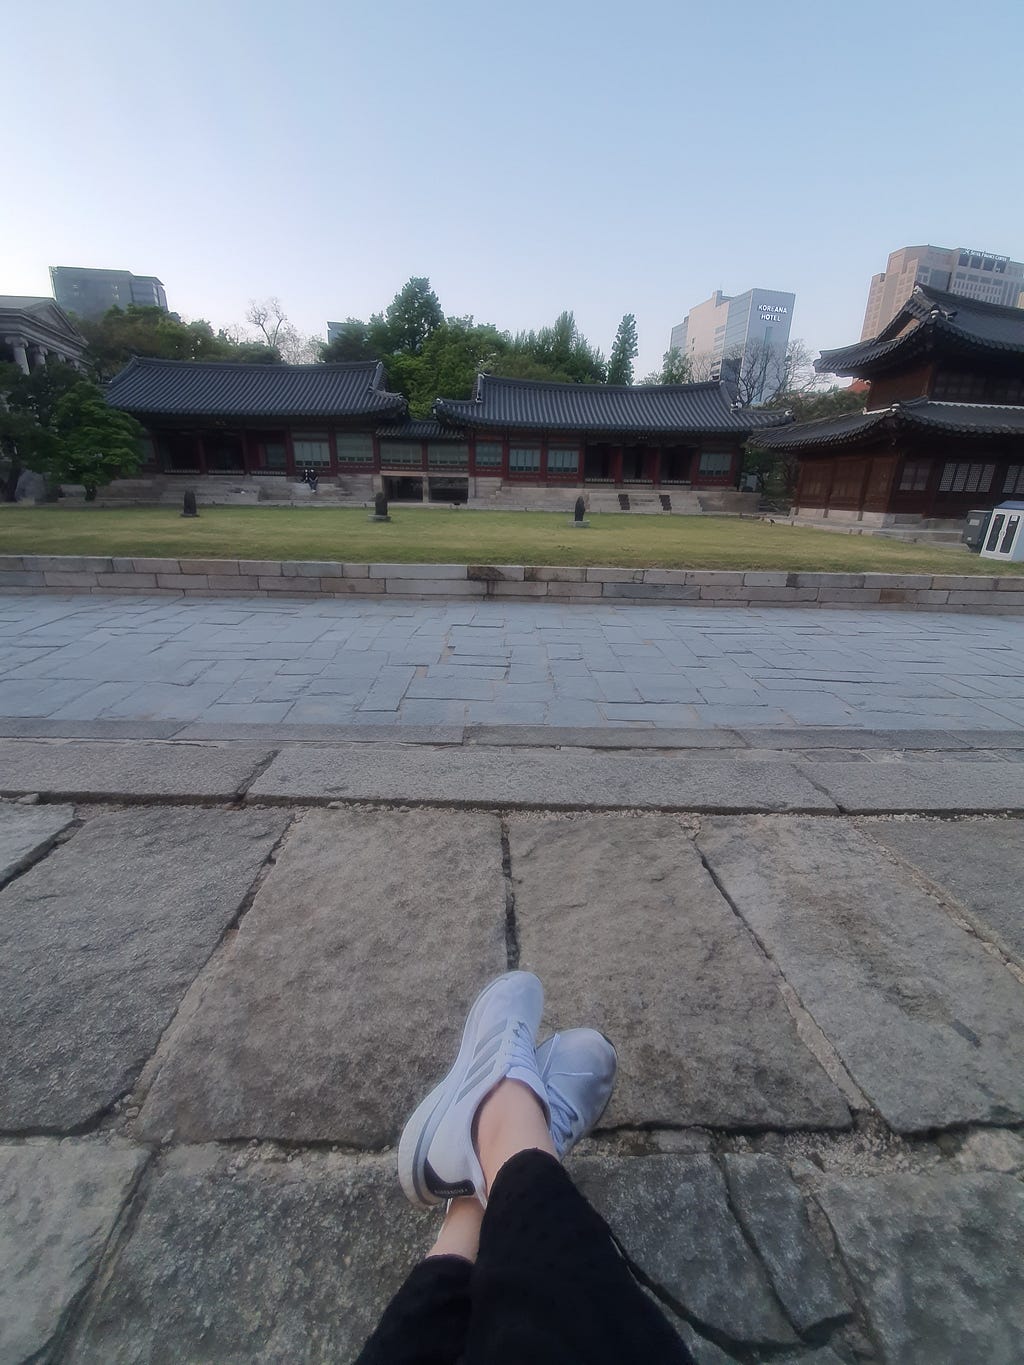 [Deoksugung Palace] in the heart of the cityscape connecting the past and the present, you’d get lost in time…